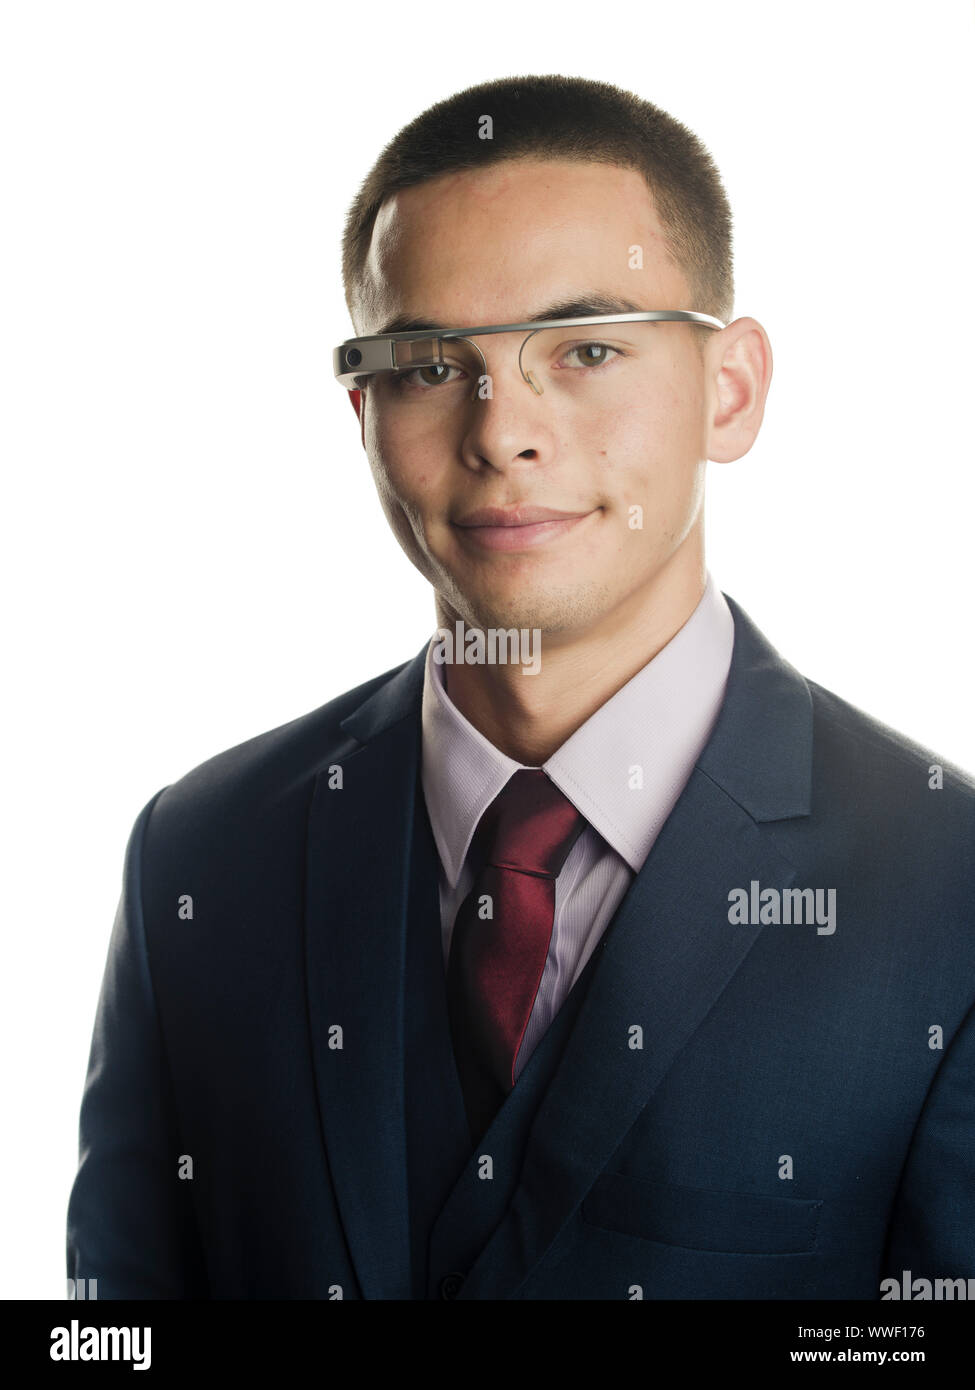 Google glass  smart glasses—an optical head-mounted display used in a business setting Stock Photo